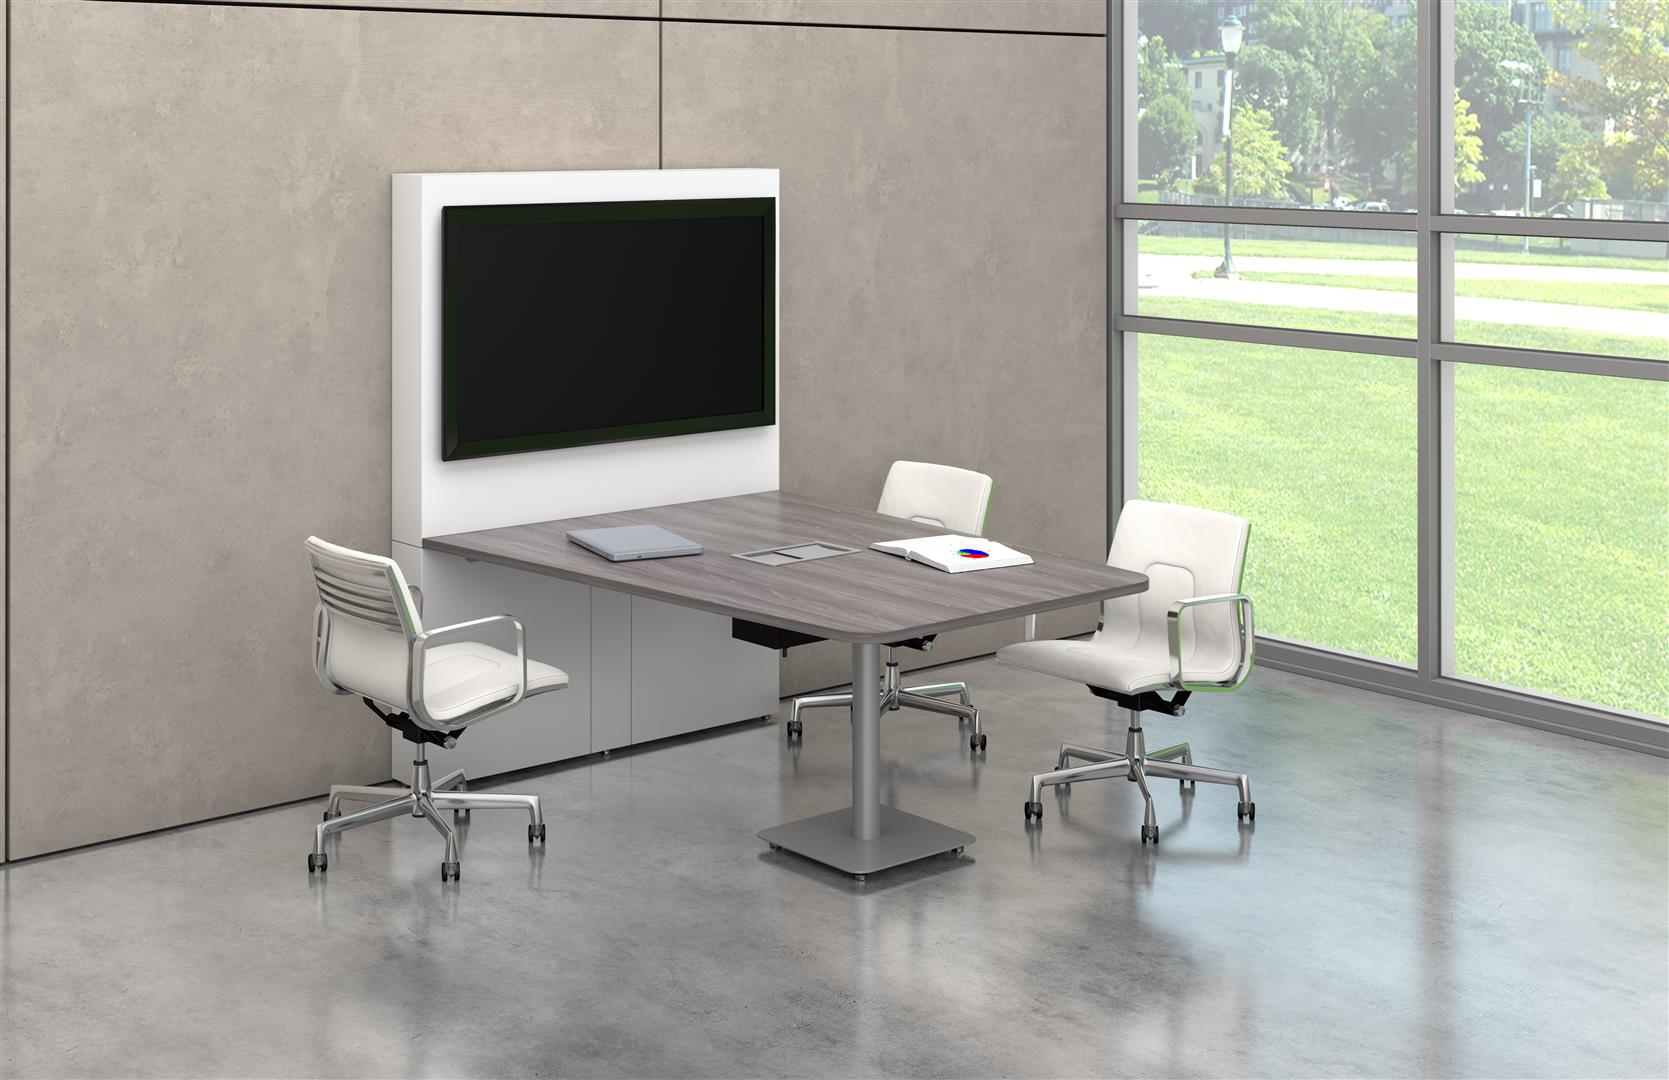 DeskMakers Video Collaboration Tables